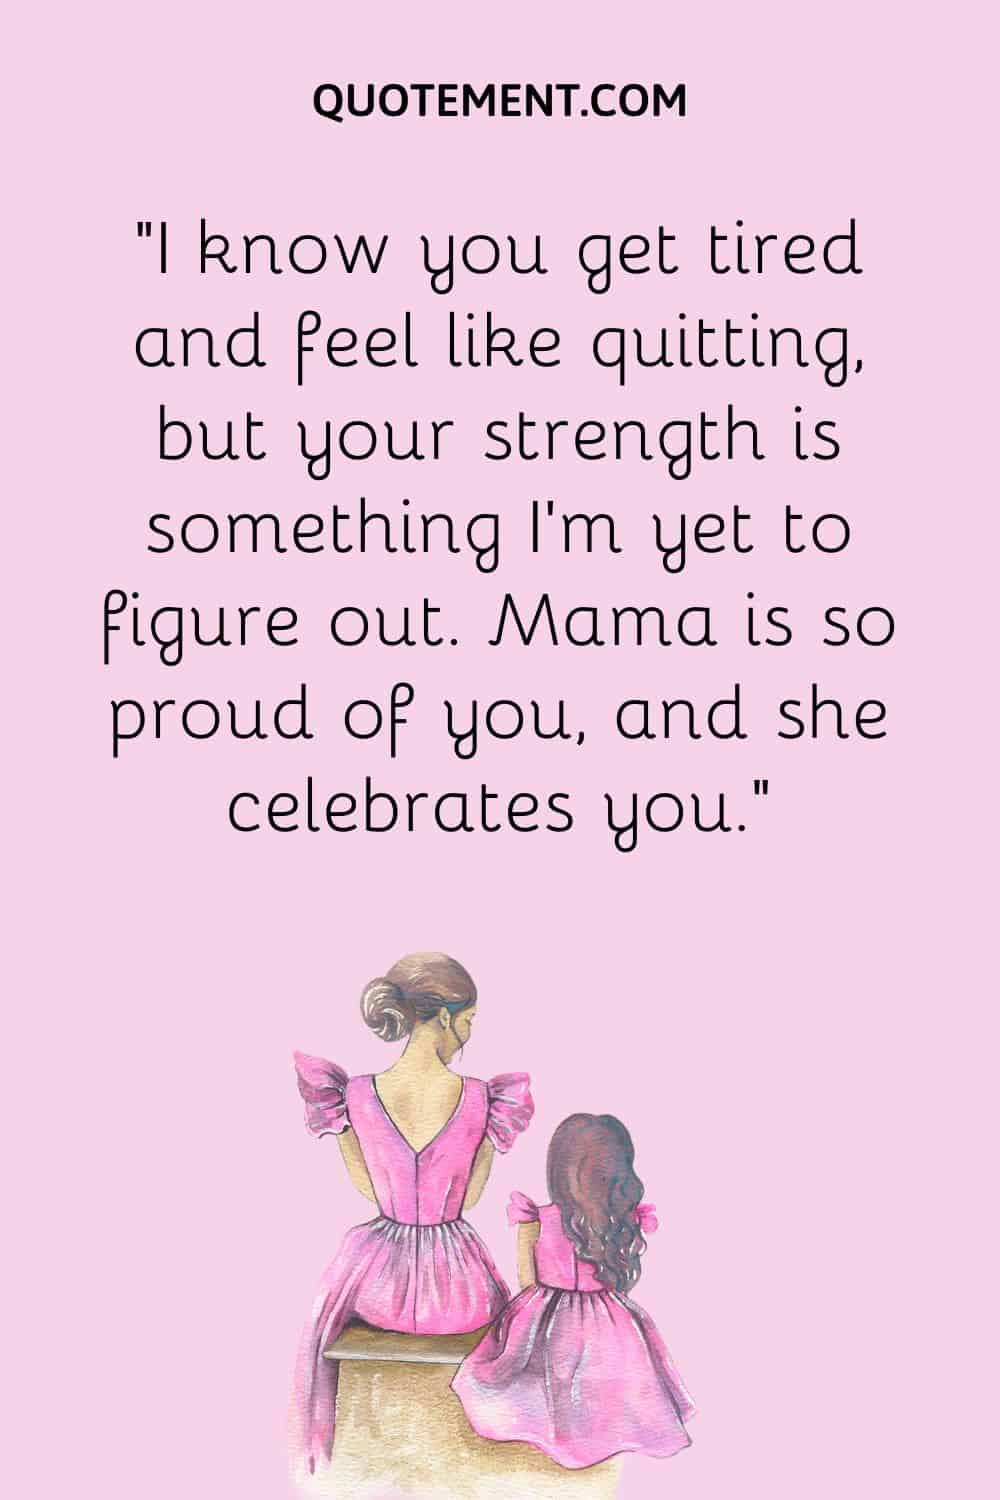 “I know you get tired and feel like quitting, but your strength is something I’m yet to figure out. Mama is so proud of you, and she celebrates you.”